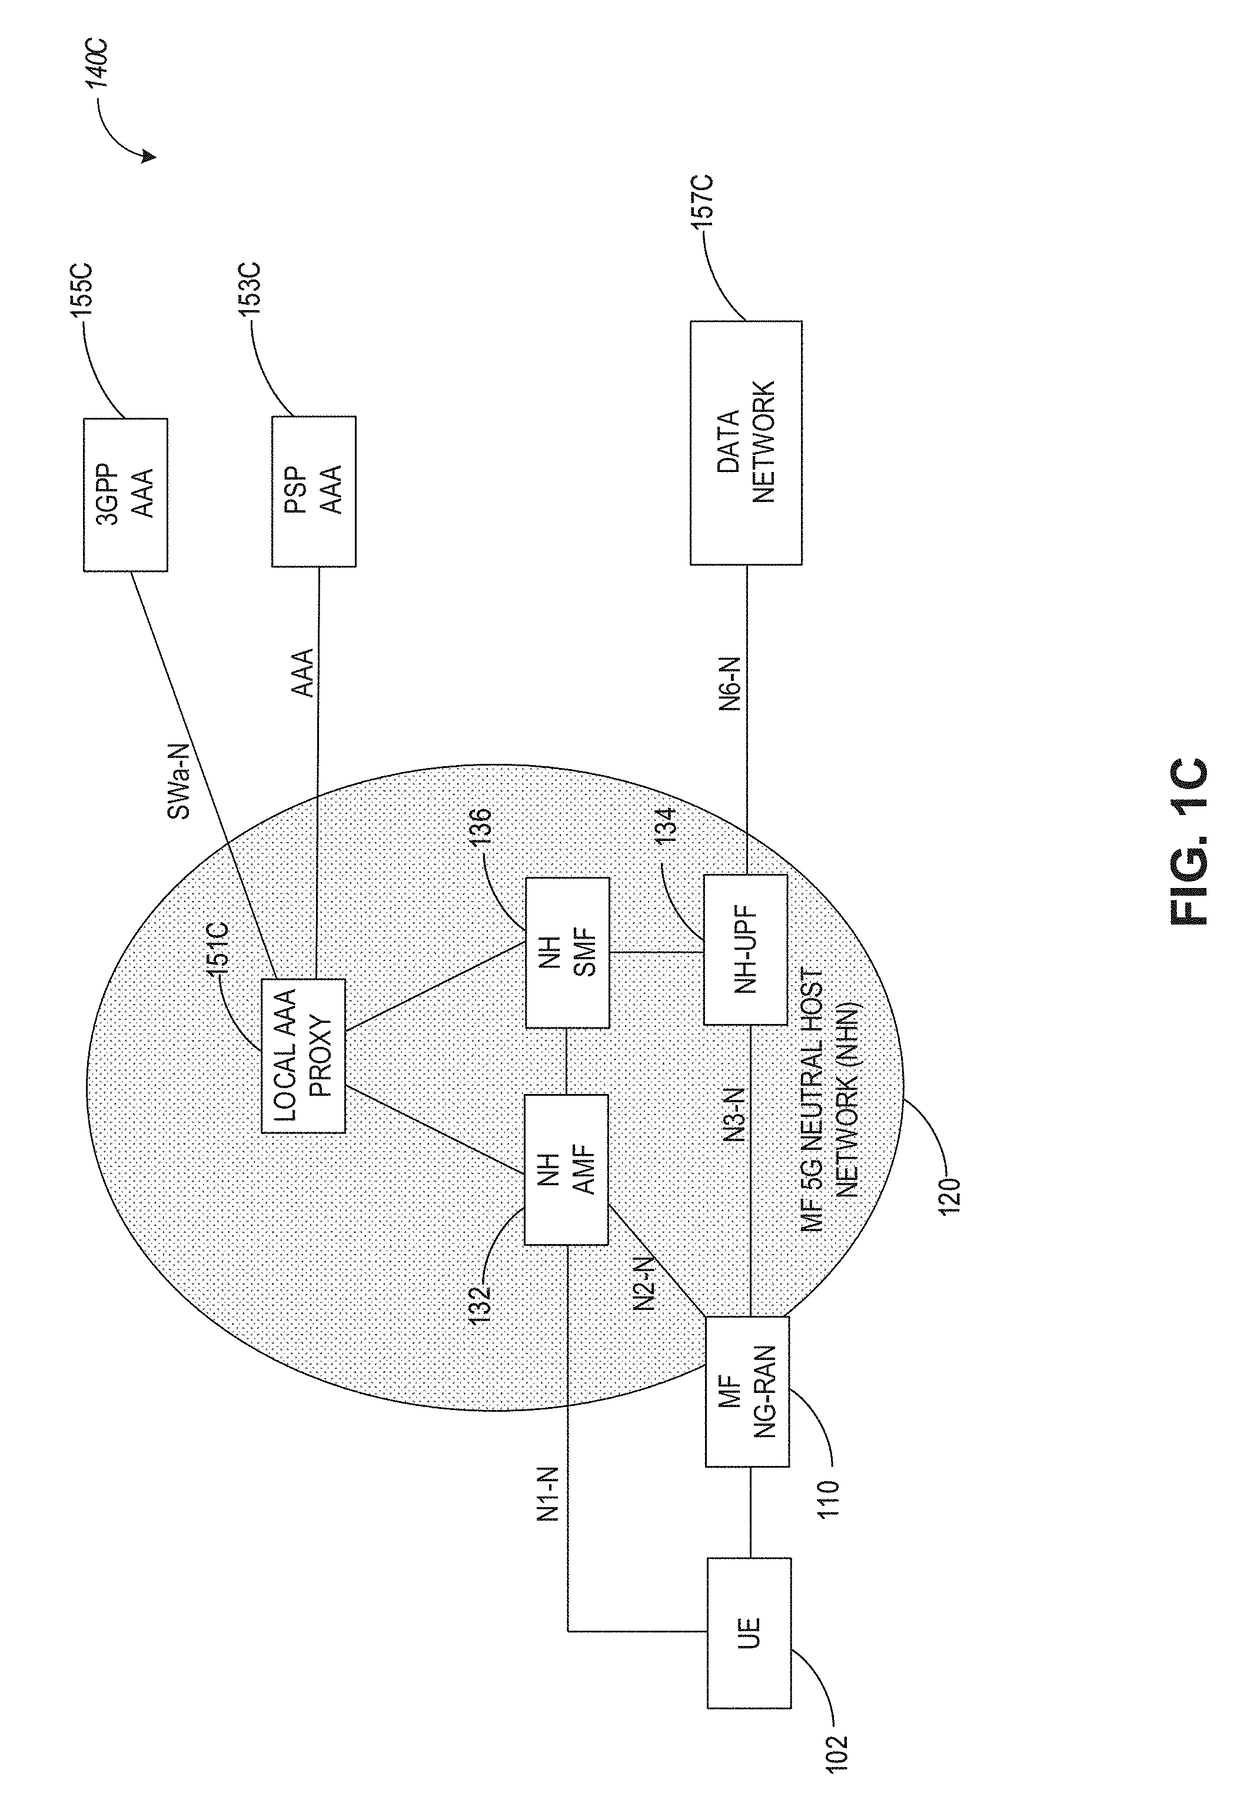 Enabling network slicing in a 5g network with cp/up separation